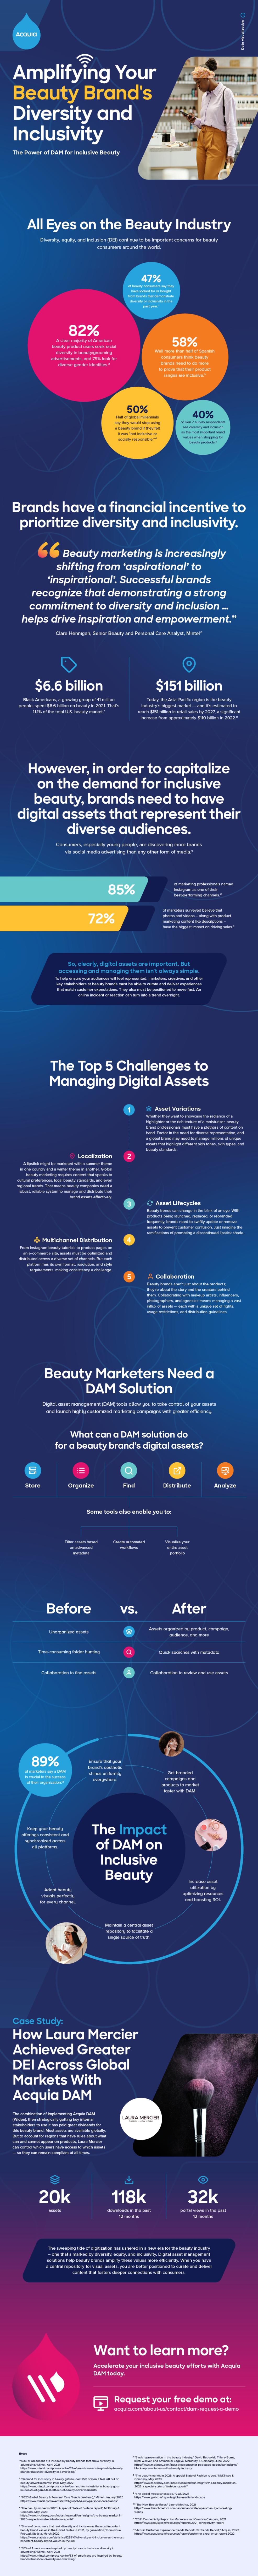 Amplifying Your Beauty Brands Diversity and Inclusivity Infographic